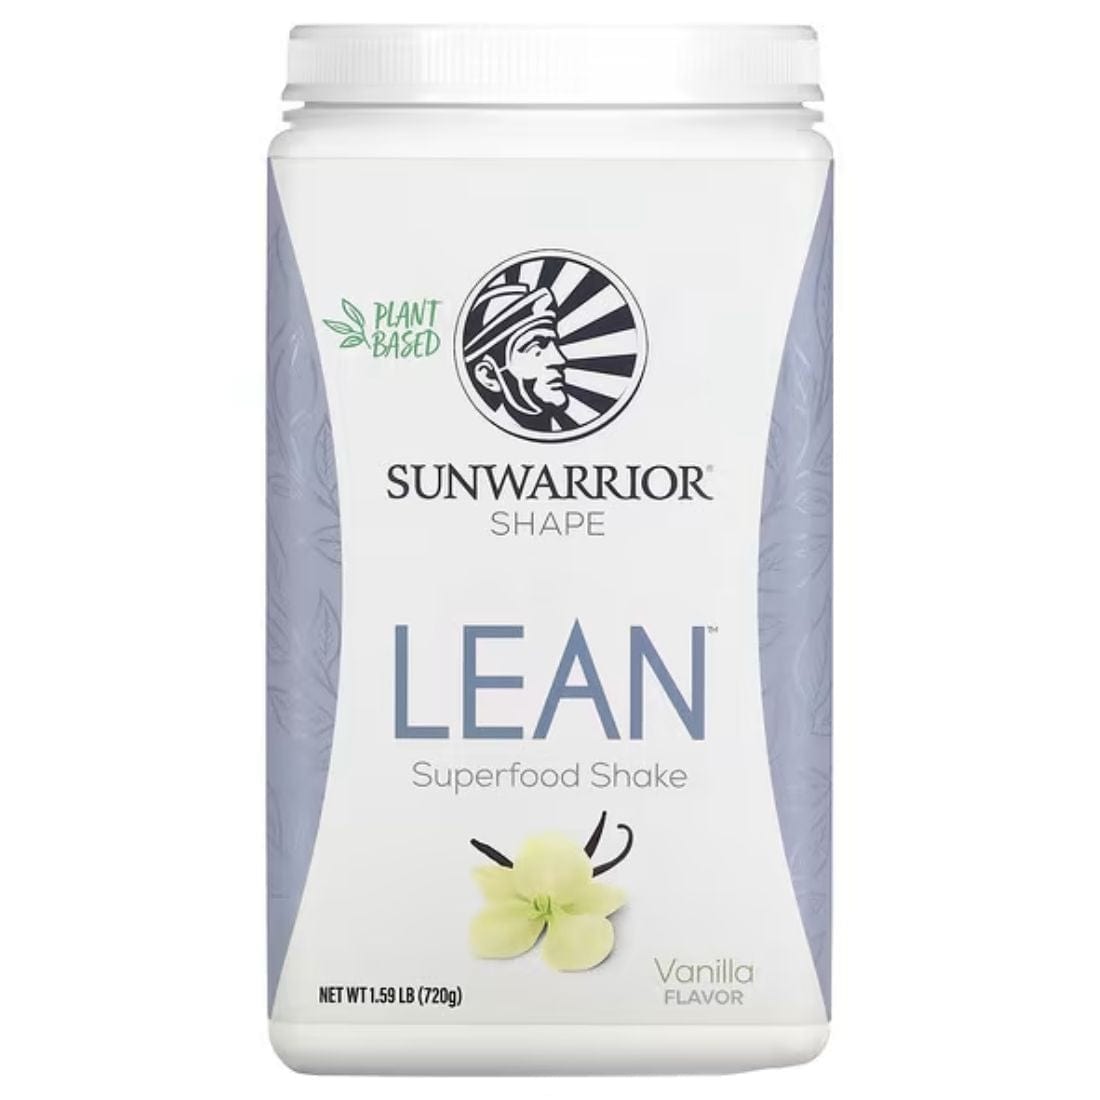 Sun Warrior Protein Lean Superfood Protein Shake (Formerly Lean Meal Illumin8), 720g